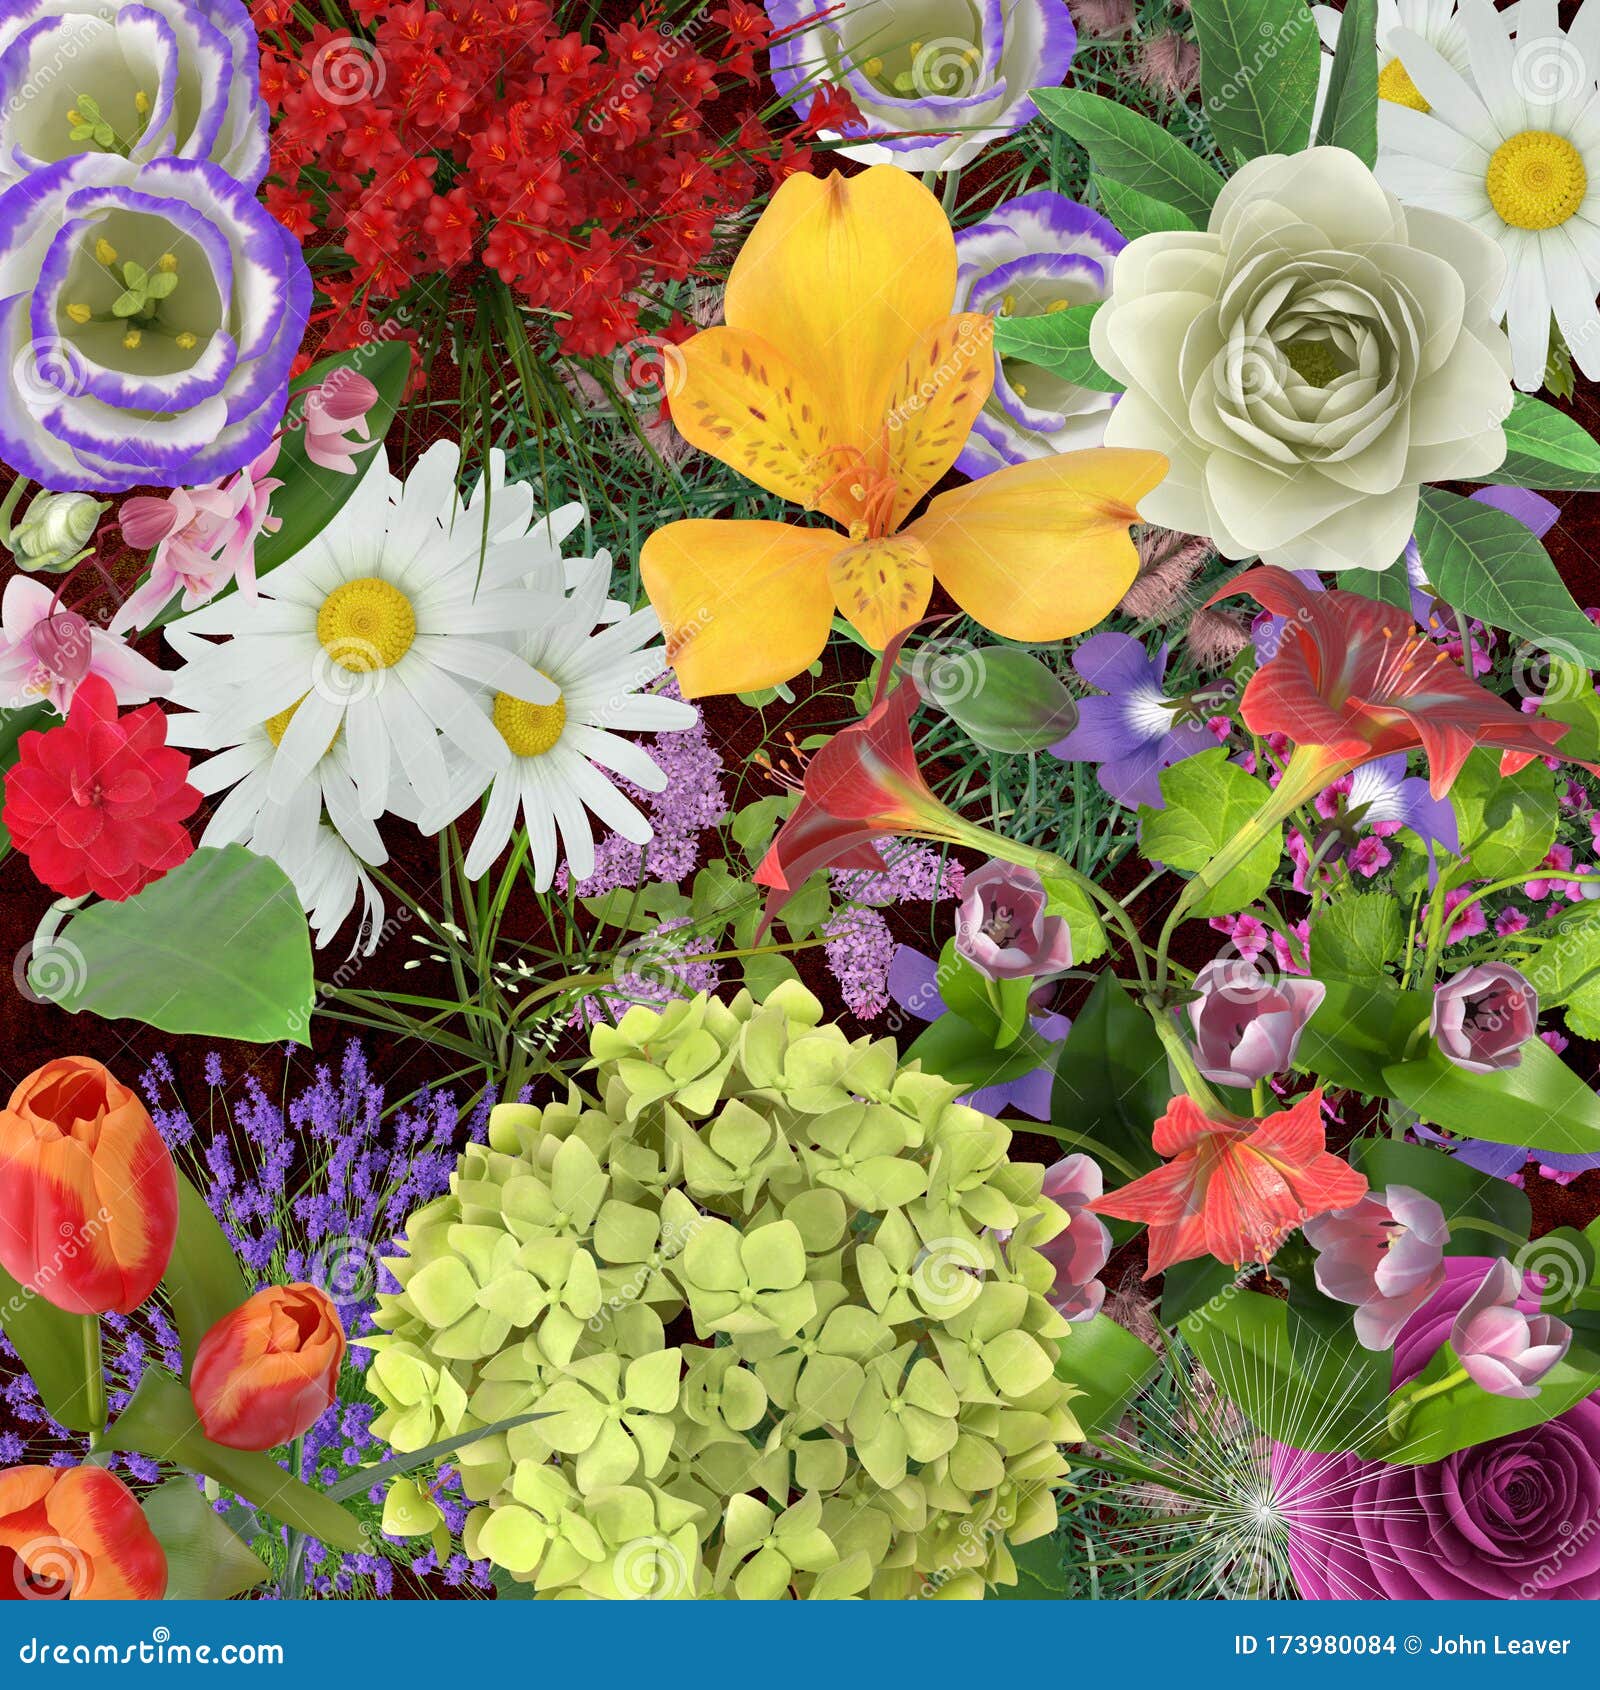 Overhead View of Lots of Colourful Flowers Stock Photo - Image of ...